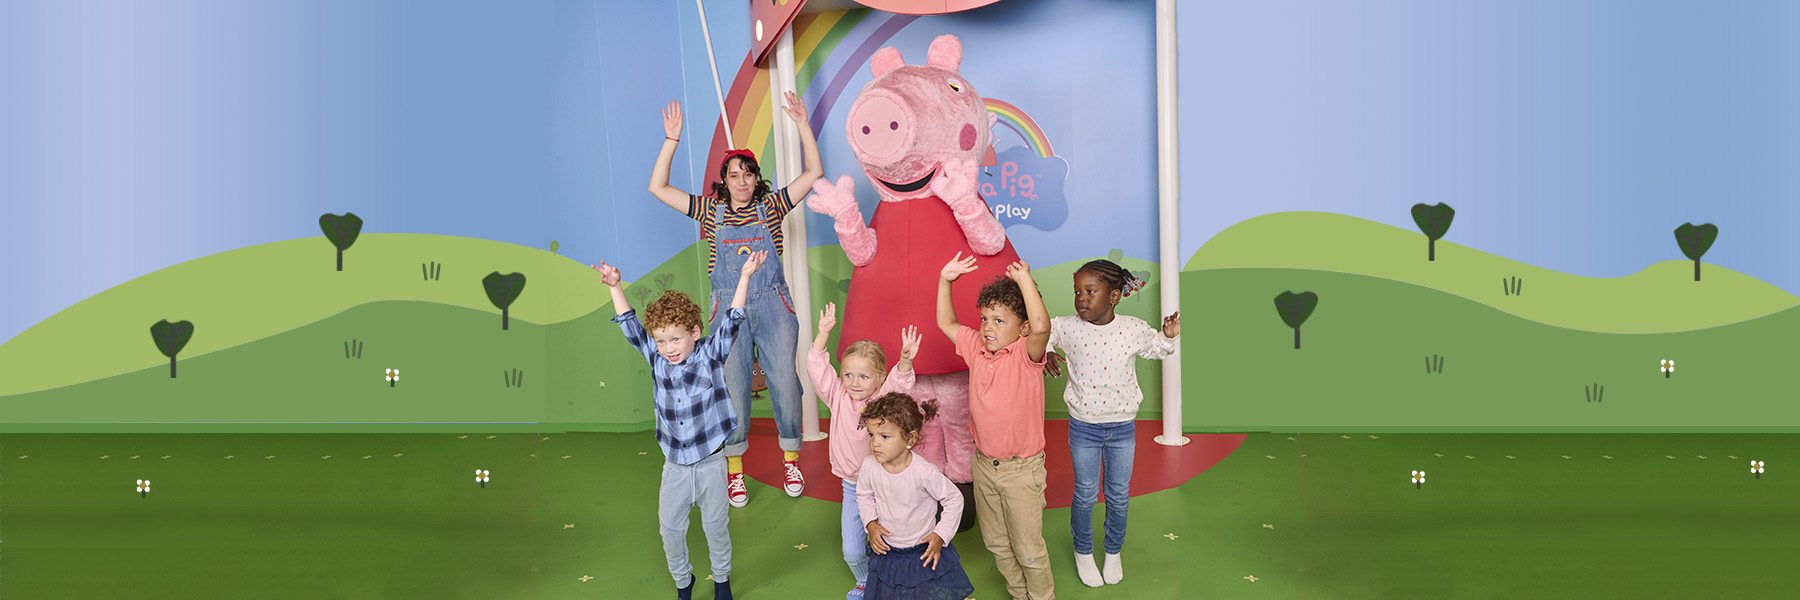 PEPPA PIG MERLIN DAY2 06 FUNTIME SHOW 0271 1800X600 (1)